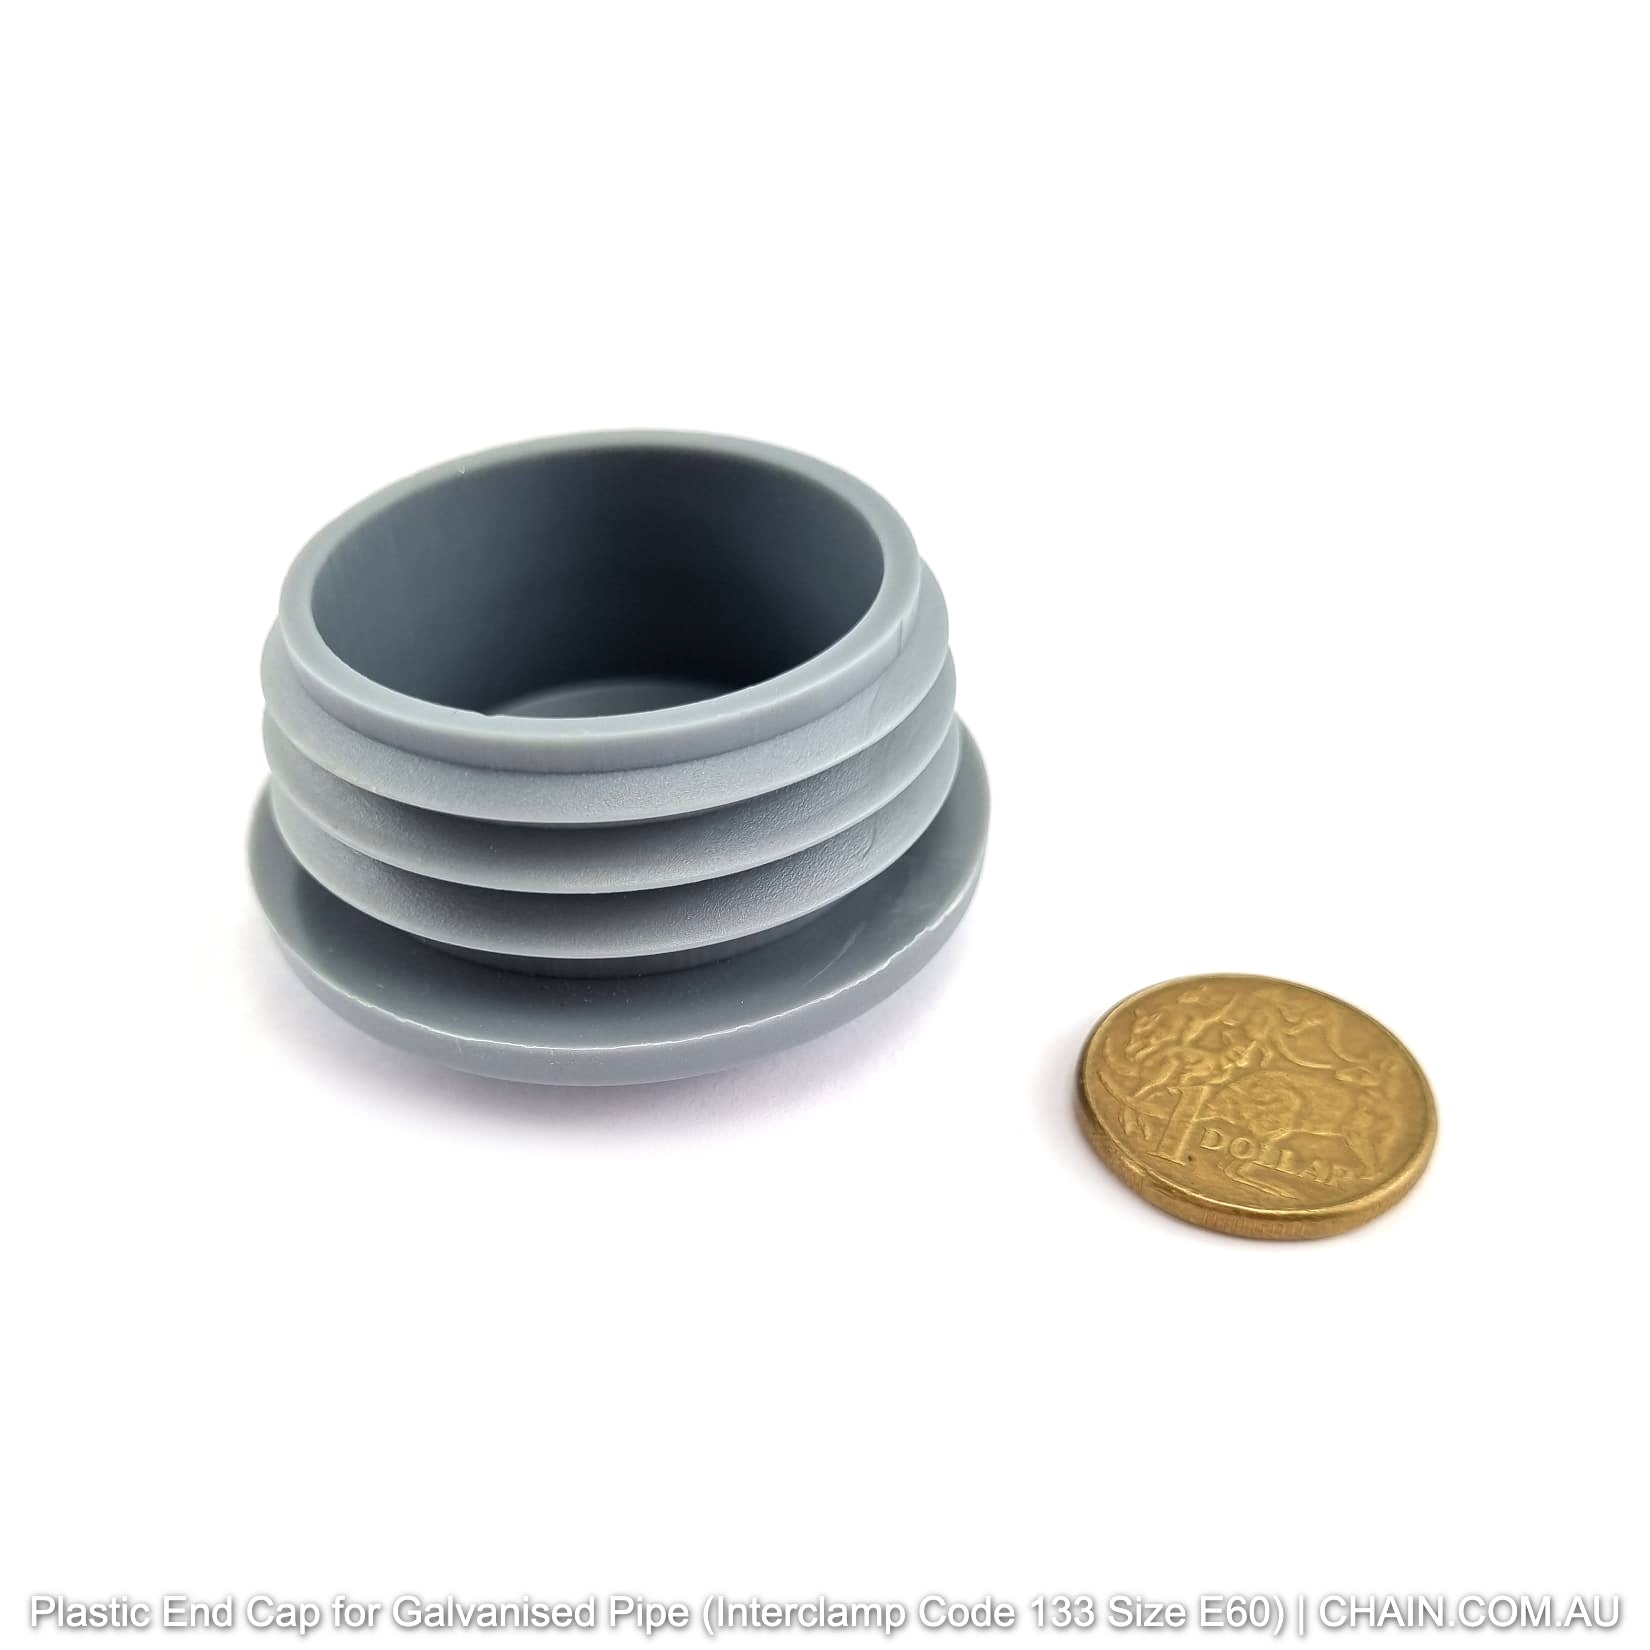 Plastic End Cap for Galvanised Pipe. Size: E60. Interclamp Code 133. Shop rail & pipe fittings online chain.com.au